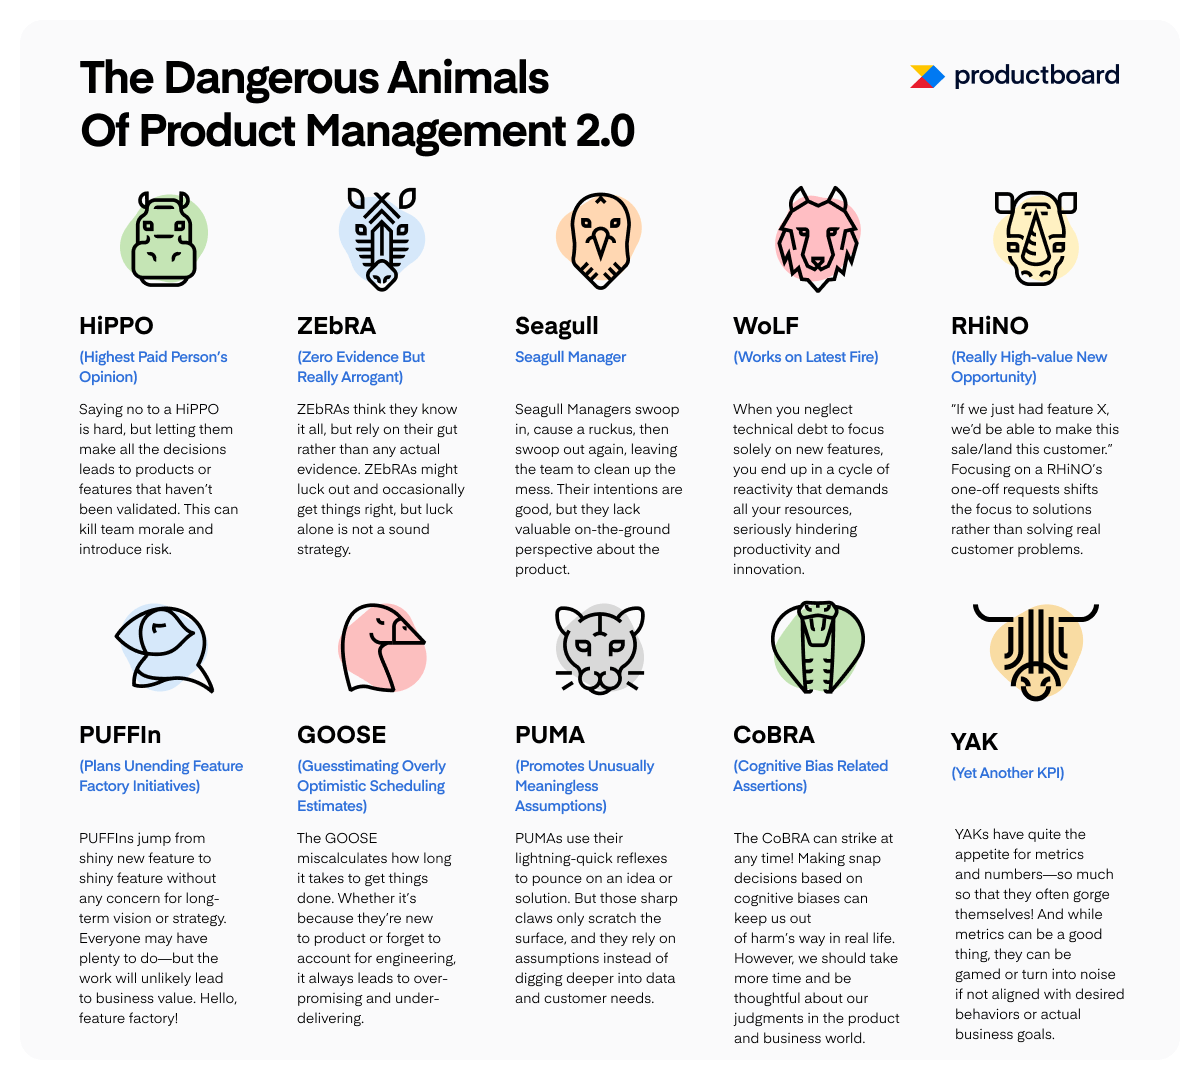 Hard Frameworks to Tame the Dangerous Animals of Product Management